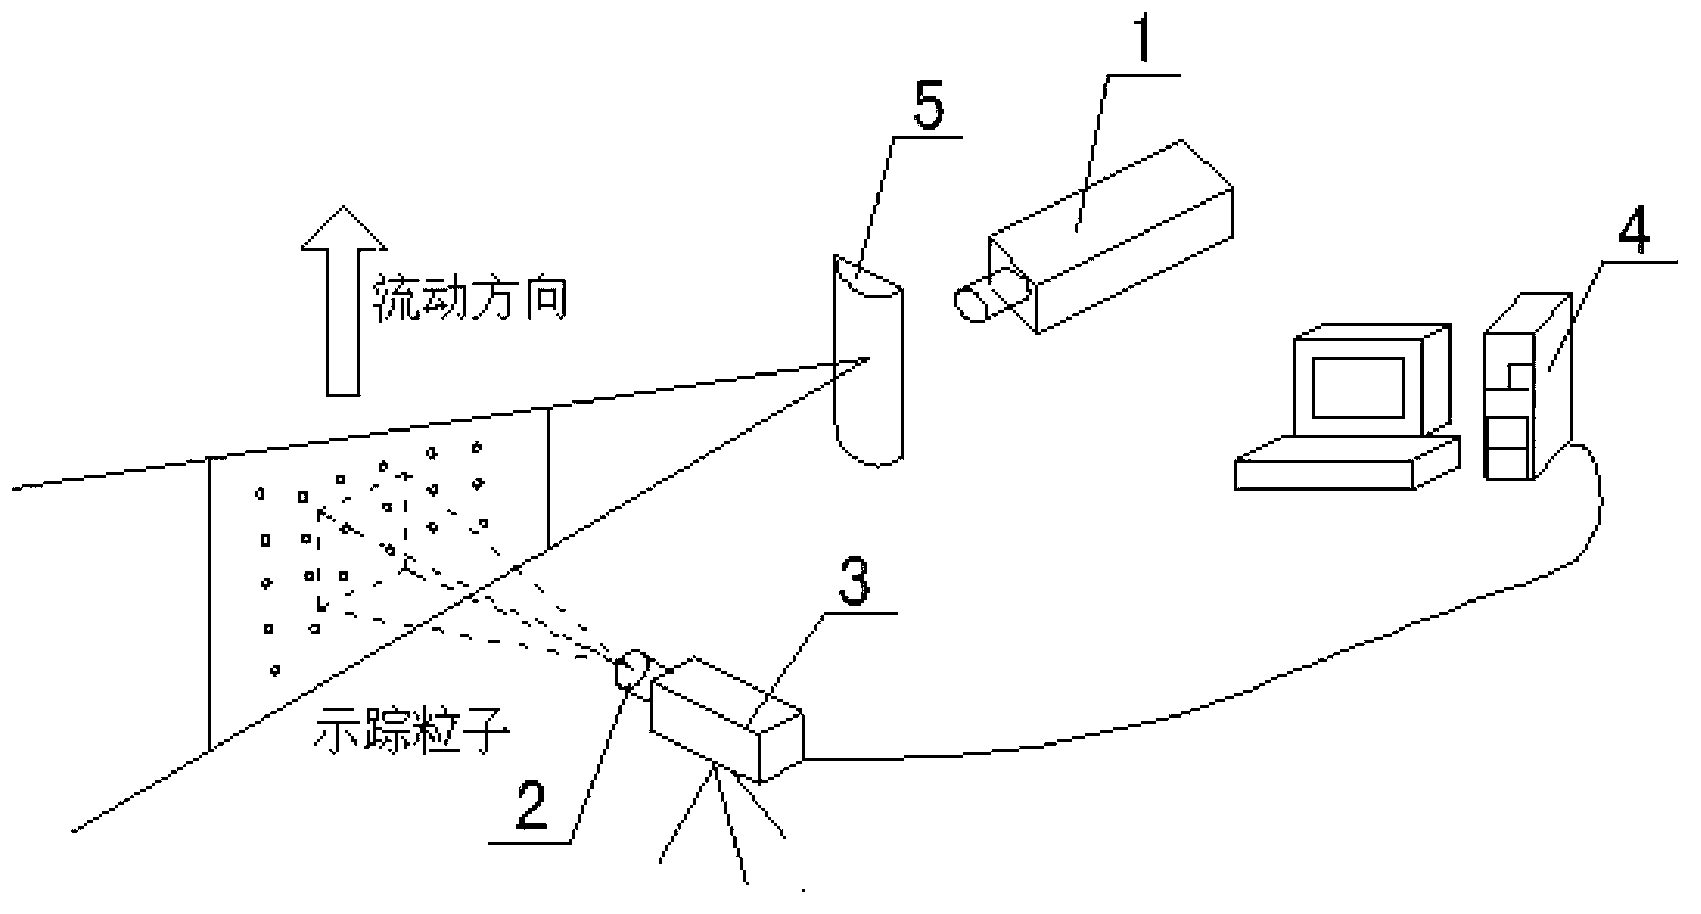 Two-dimensional flow velocity field measurement method and device of interlaced scanning CCD (charge coupled device)